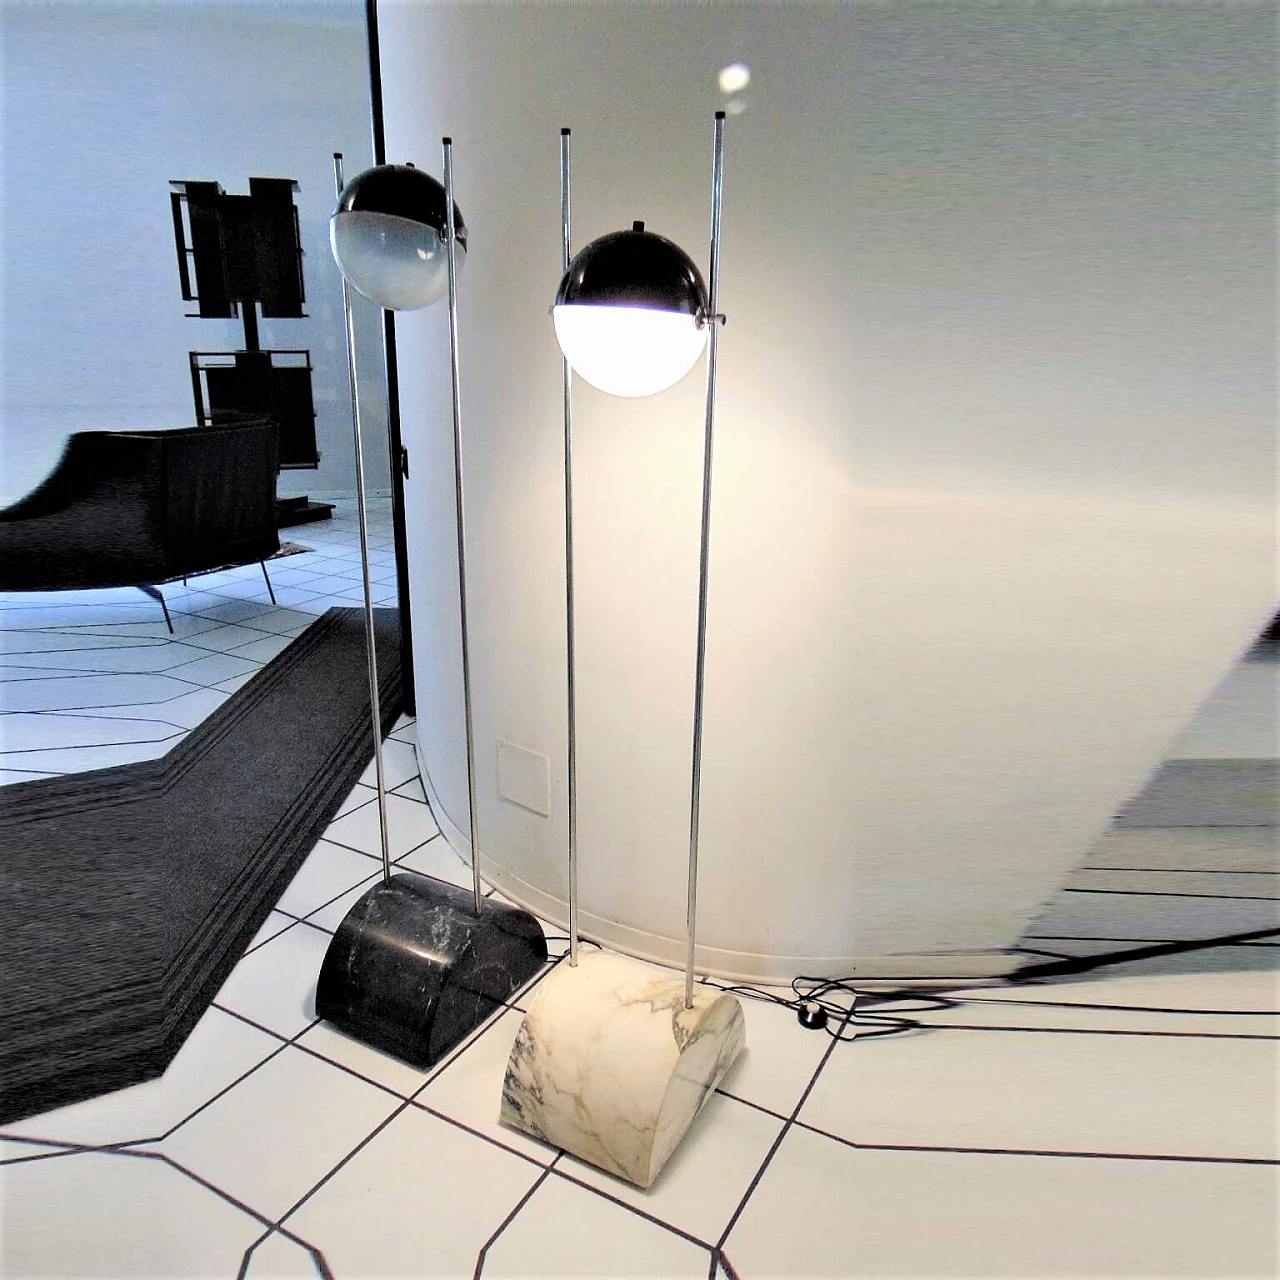 Adjustable White Marble Floor Lamp by Gruppo A.R.D.I.T.I., Sormani Div. Nucleo, Italy 1069088